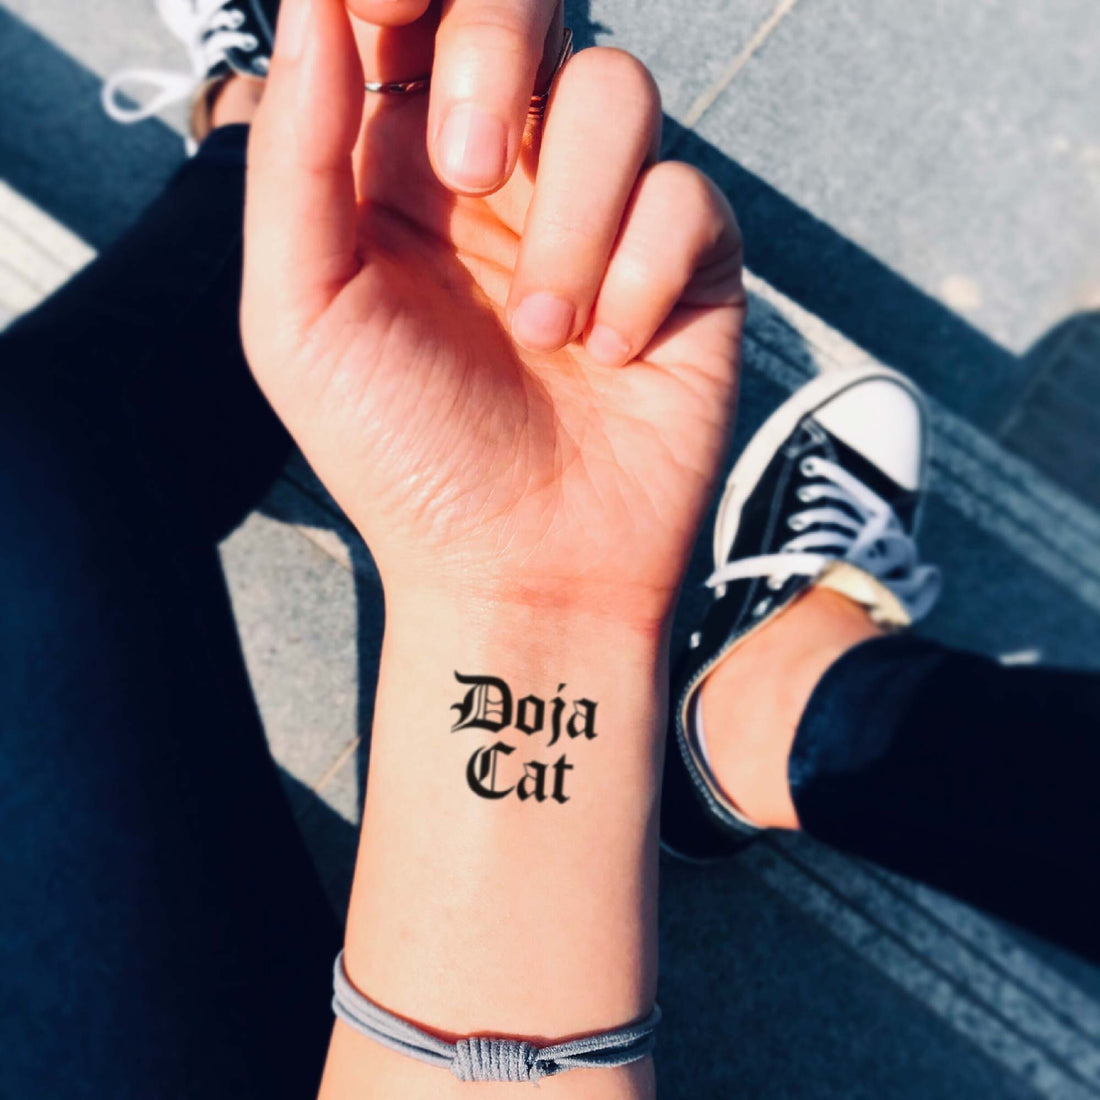 Doja Cat custom temporary tattoo sticker design idea inspiration meanings removal arm wrist hand words font name signature calligraphy lyrics tour concert outfits merch accessory gift souvenir costumes wear dress up code